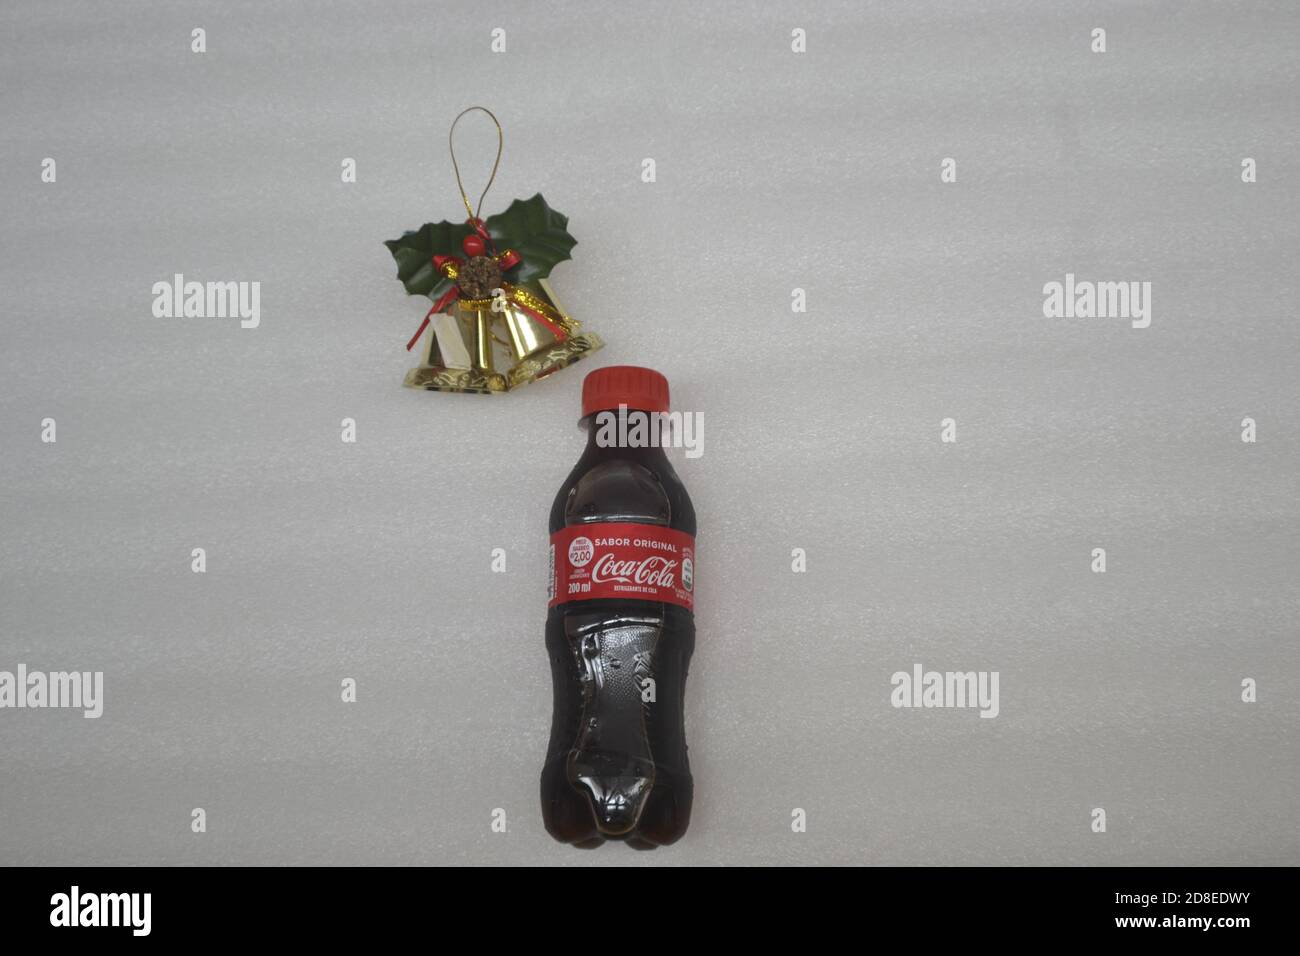 Soda bottle. Mini promotional plastic bottle from a multinational company, with Christmas bells, white background, with red cap, Brazil, South America Stock Photo